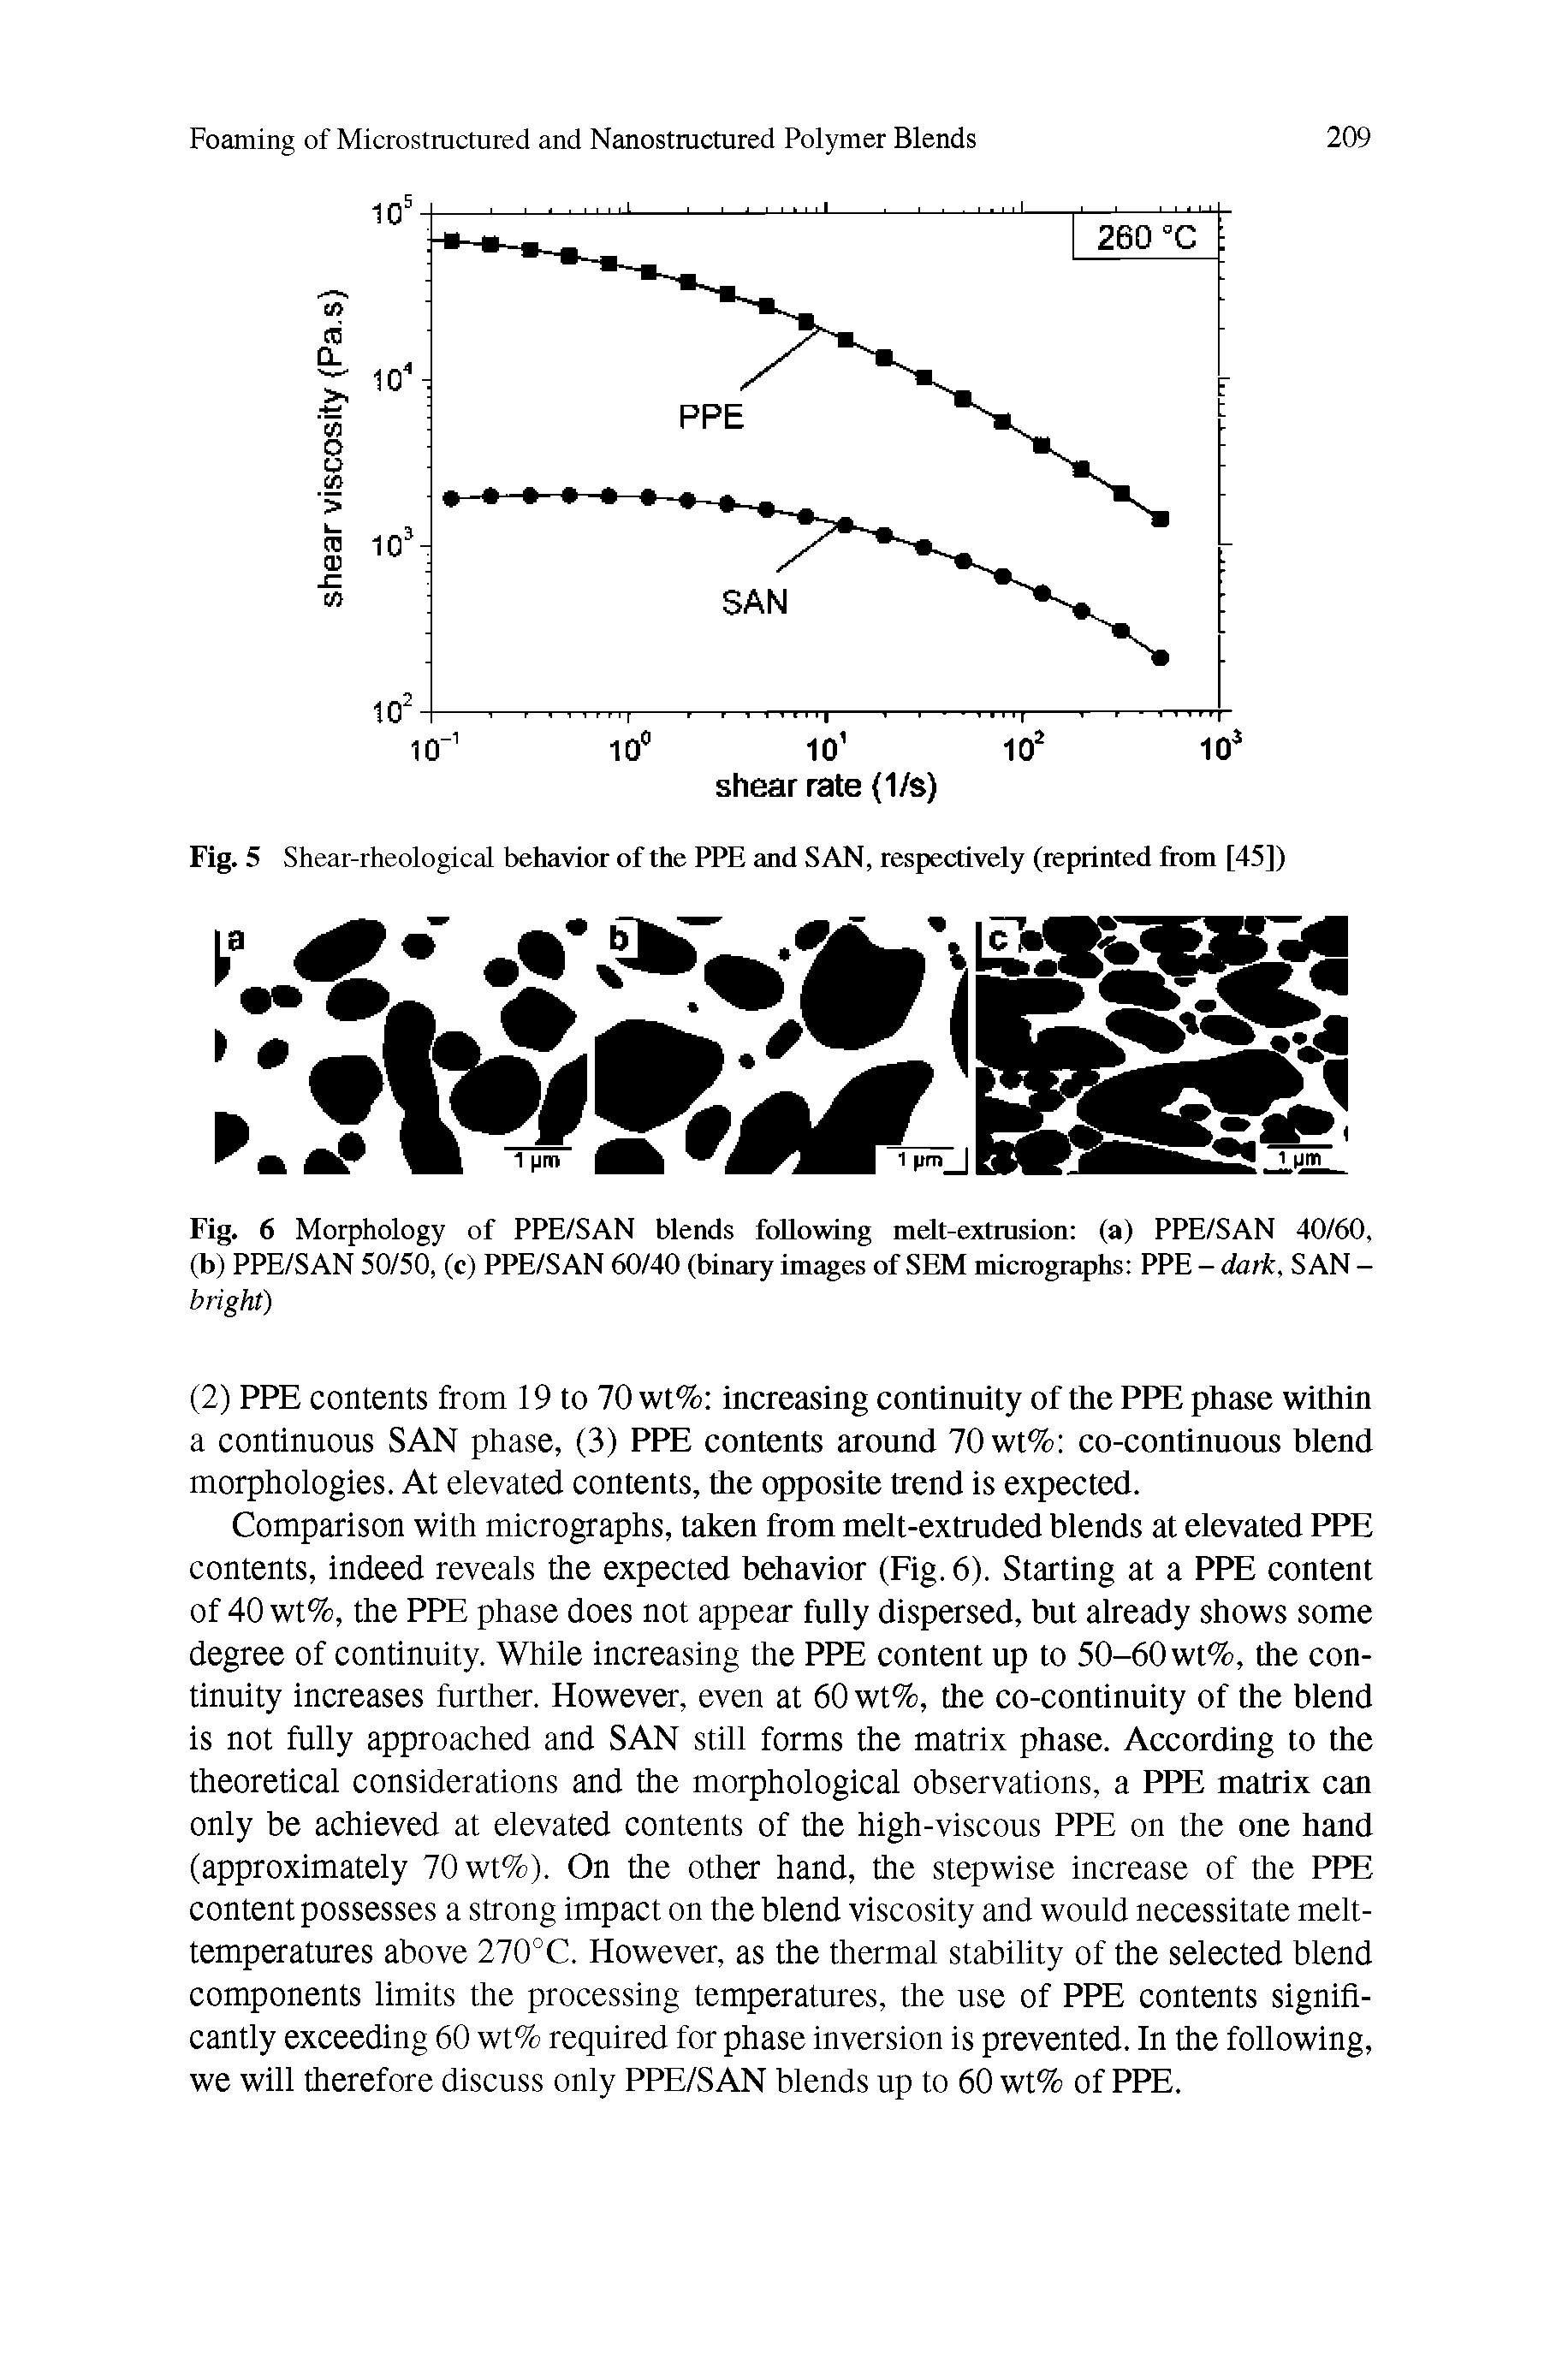 Fig. 5 Shear-rheological behavior of the PPE and SAN, respectively (reprinted from [45])...